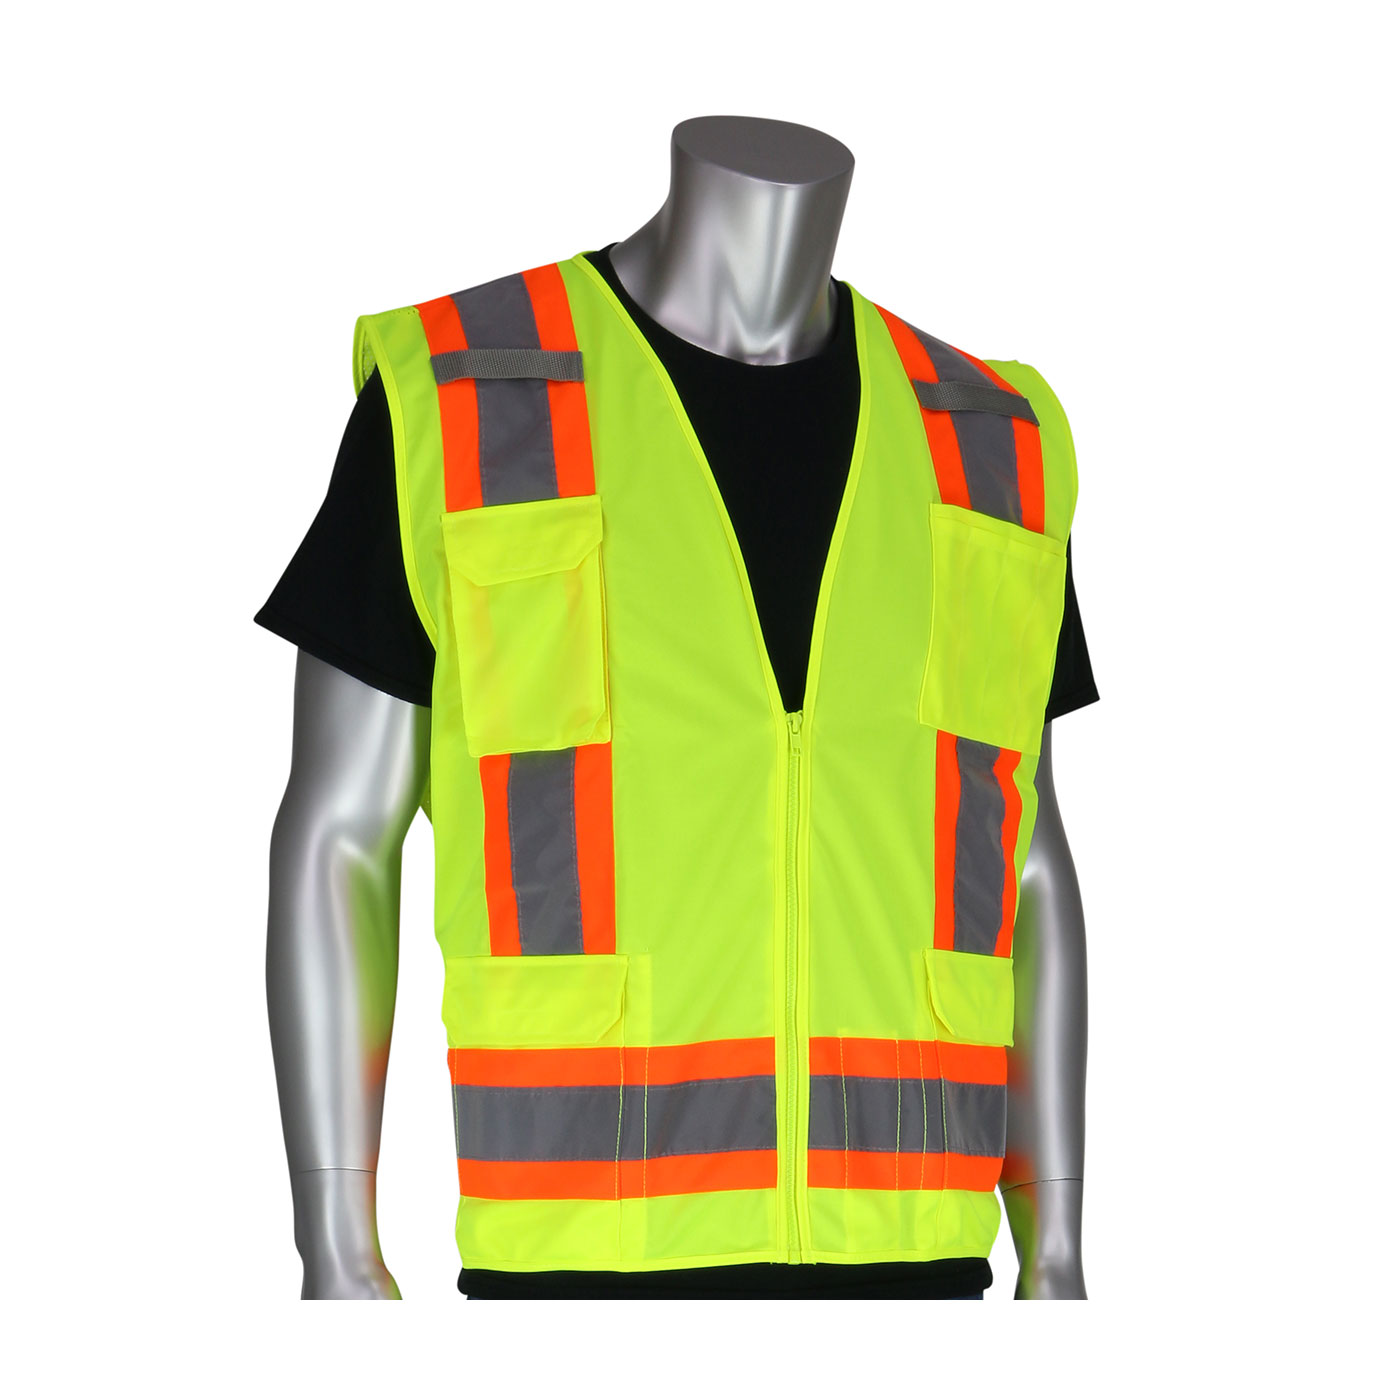 PIP 302-0500-YEL/M ANSI Type R Class 2 Two-Tone Eleven Pocket Yellow Surveyors Vest with Solid Front and Mesh Back - Medium PID-302 0500YEL M